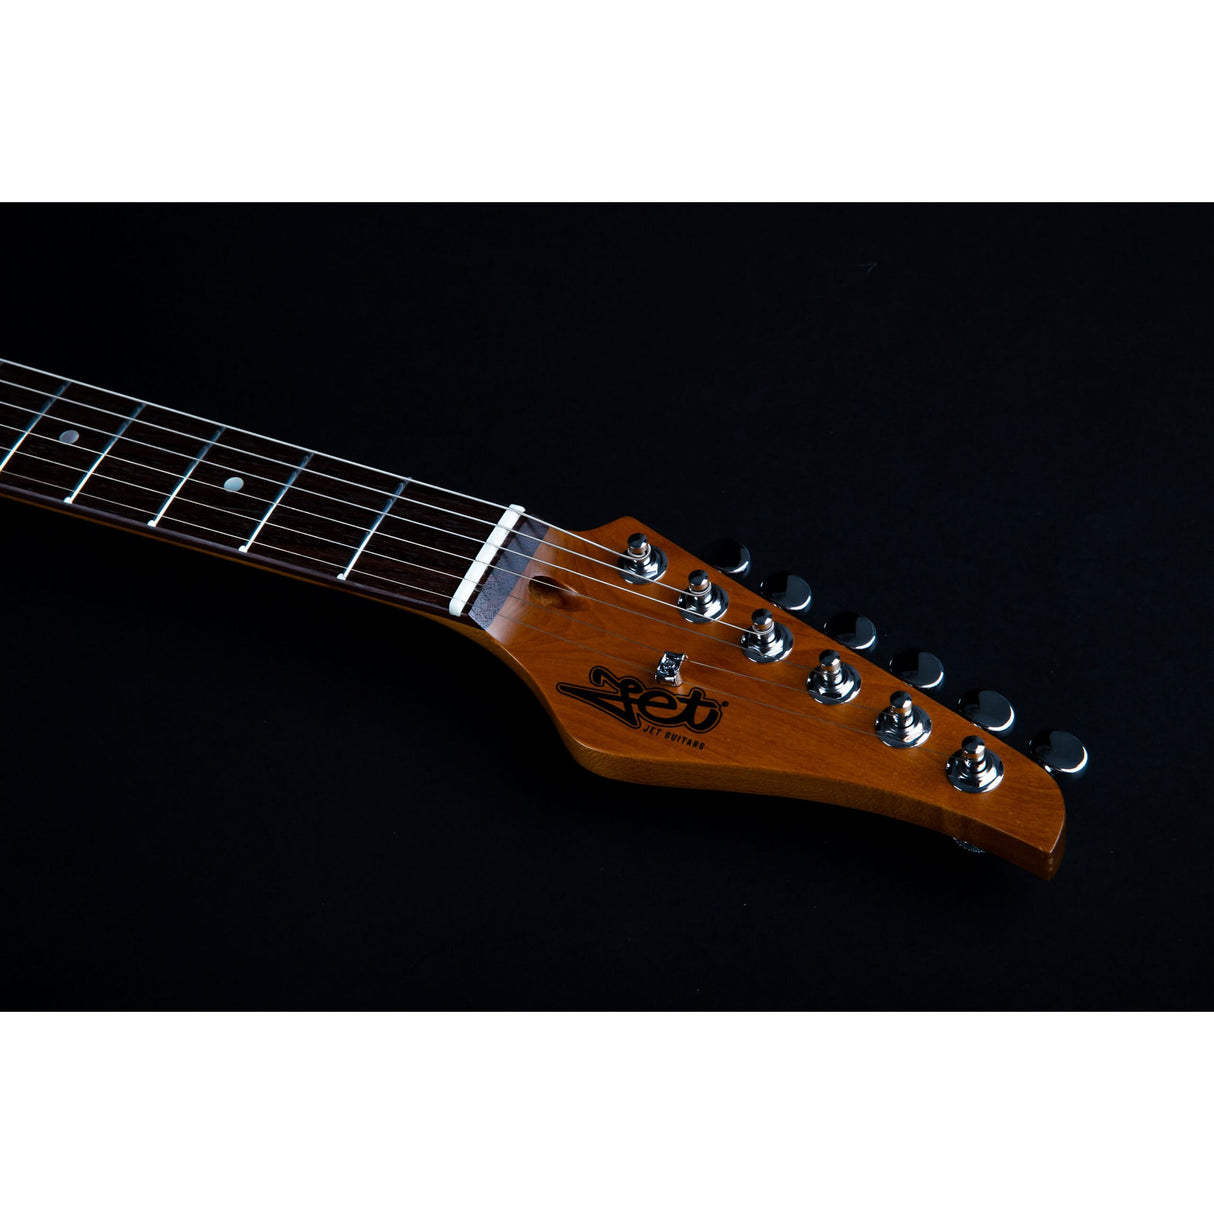 Jet Guitars JT-450 QTPK HH Basswood Body Electric Guitar with Quilted Top, Roasted Maple Neck and Fretboard